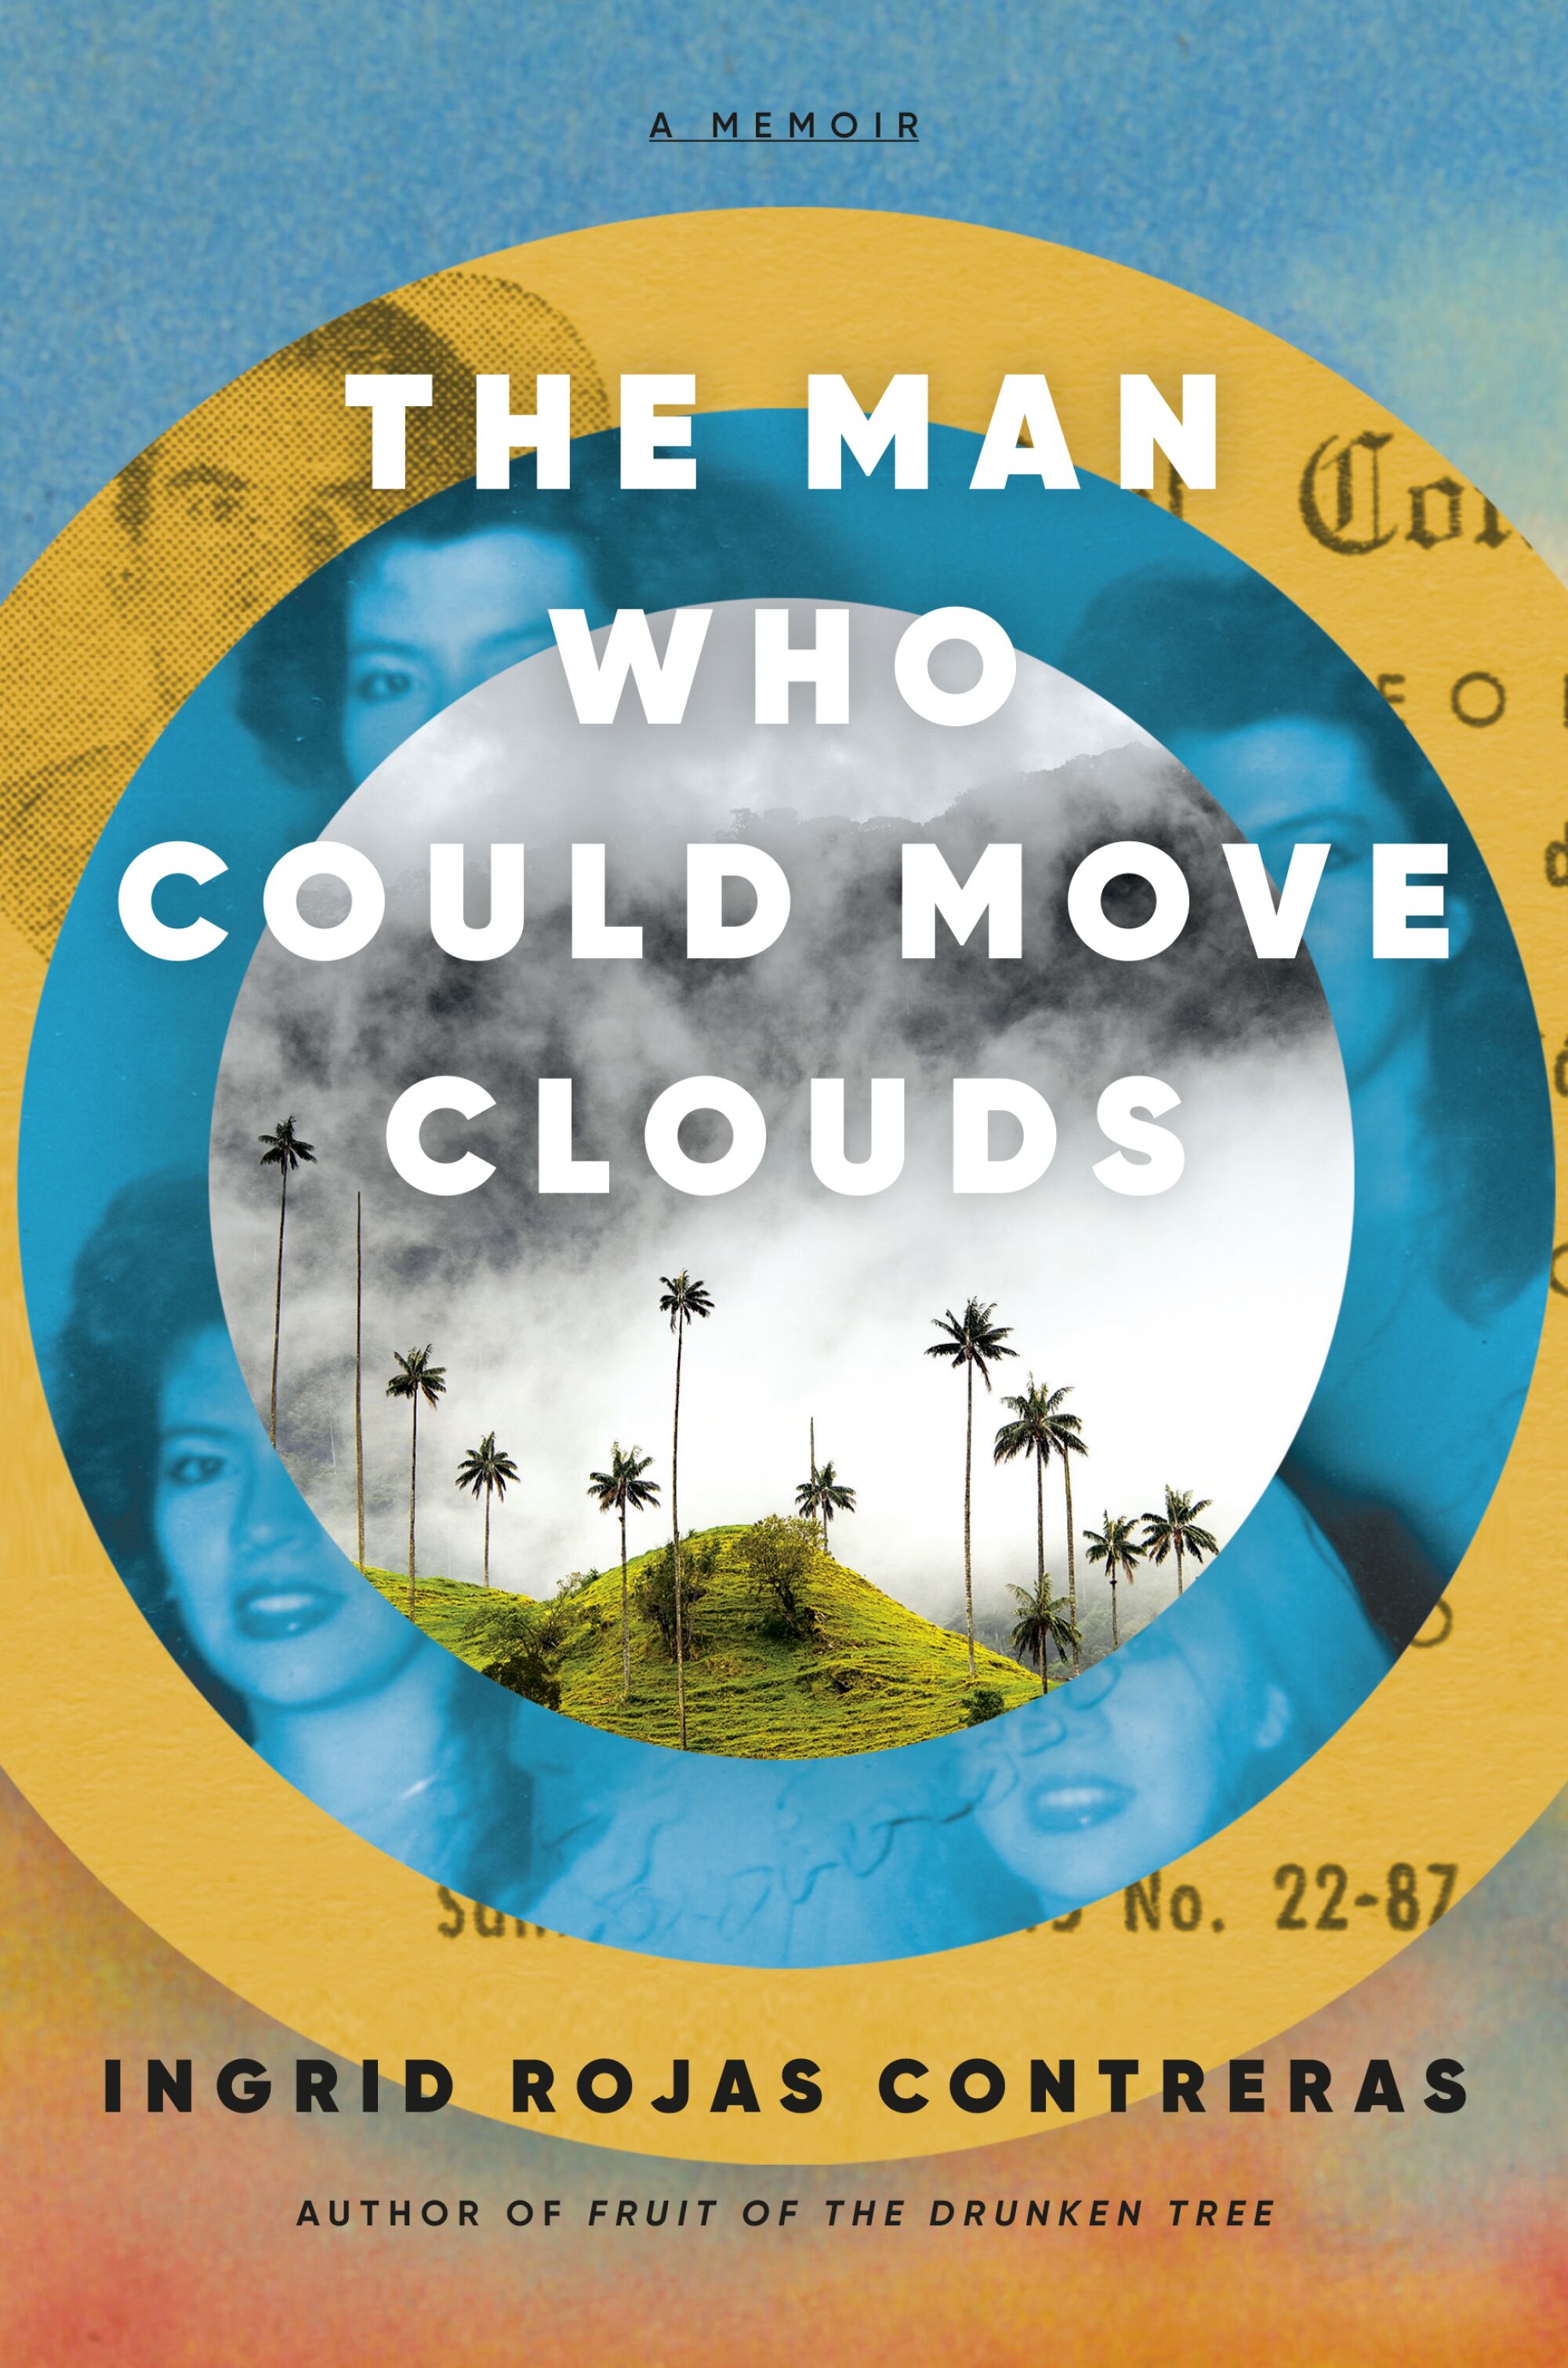 "The Man Who Could Move Clouds" by Ingrid Rojas Contreras